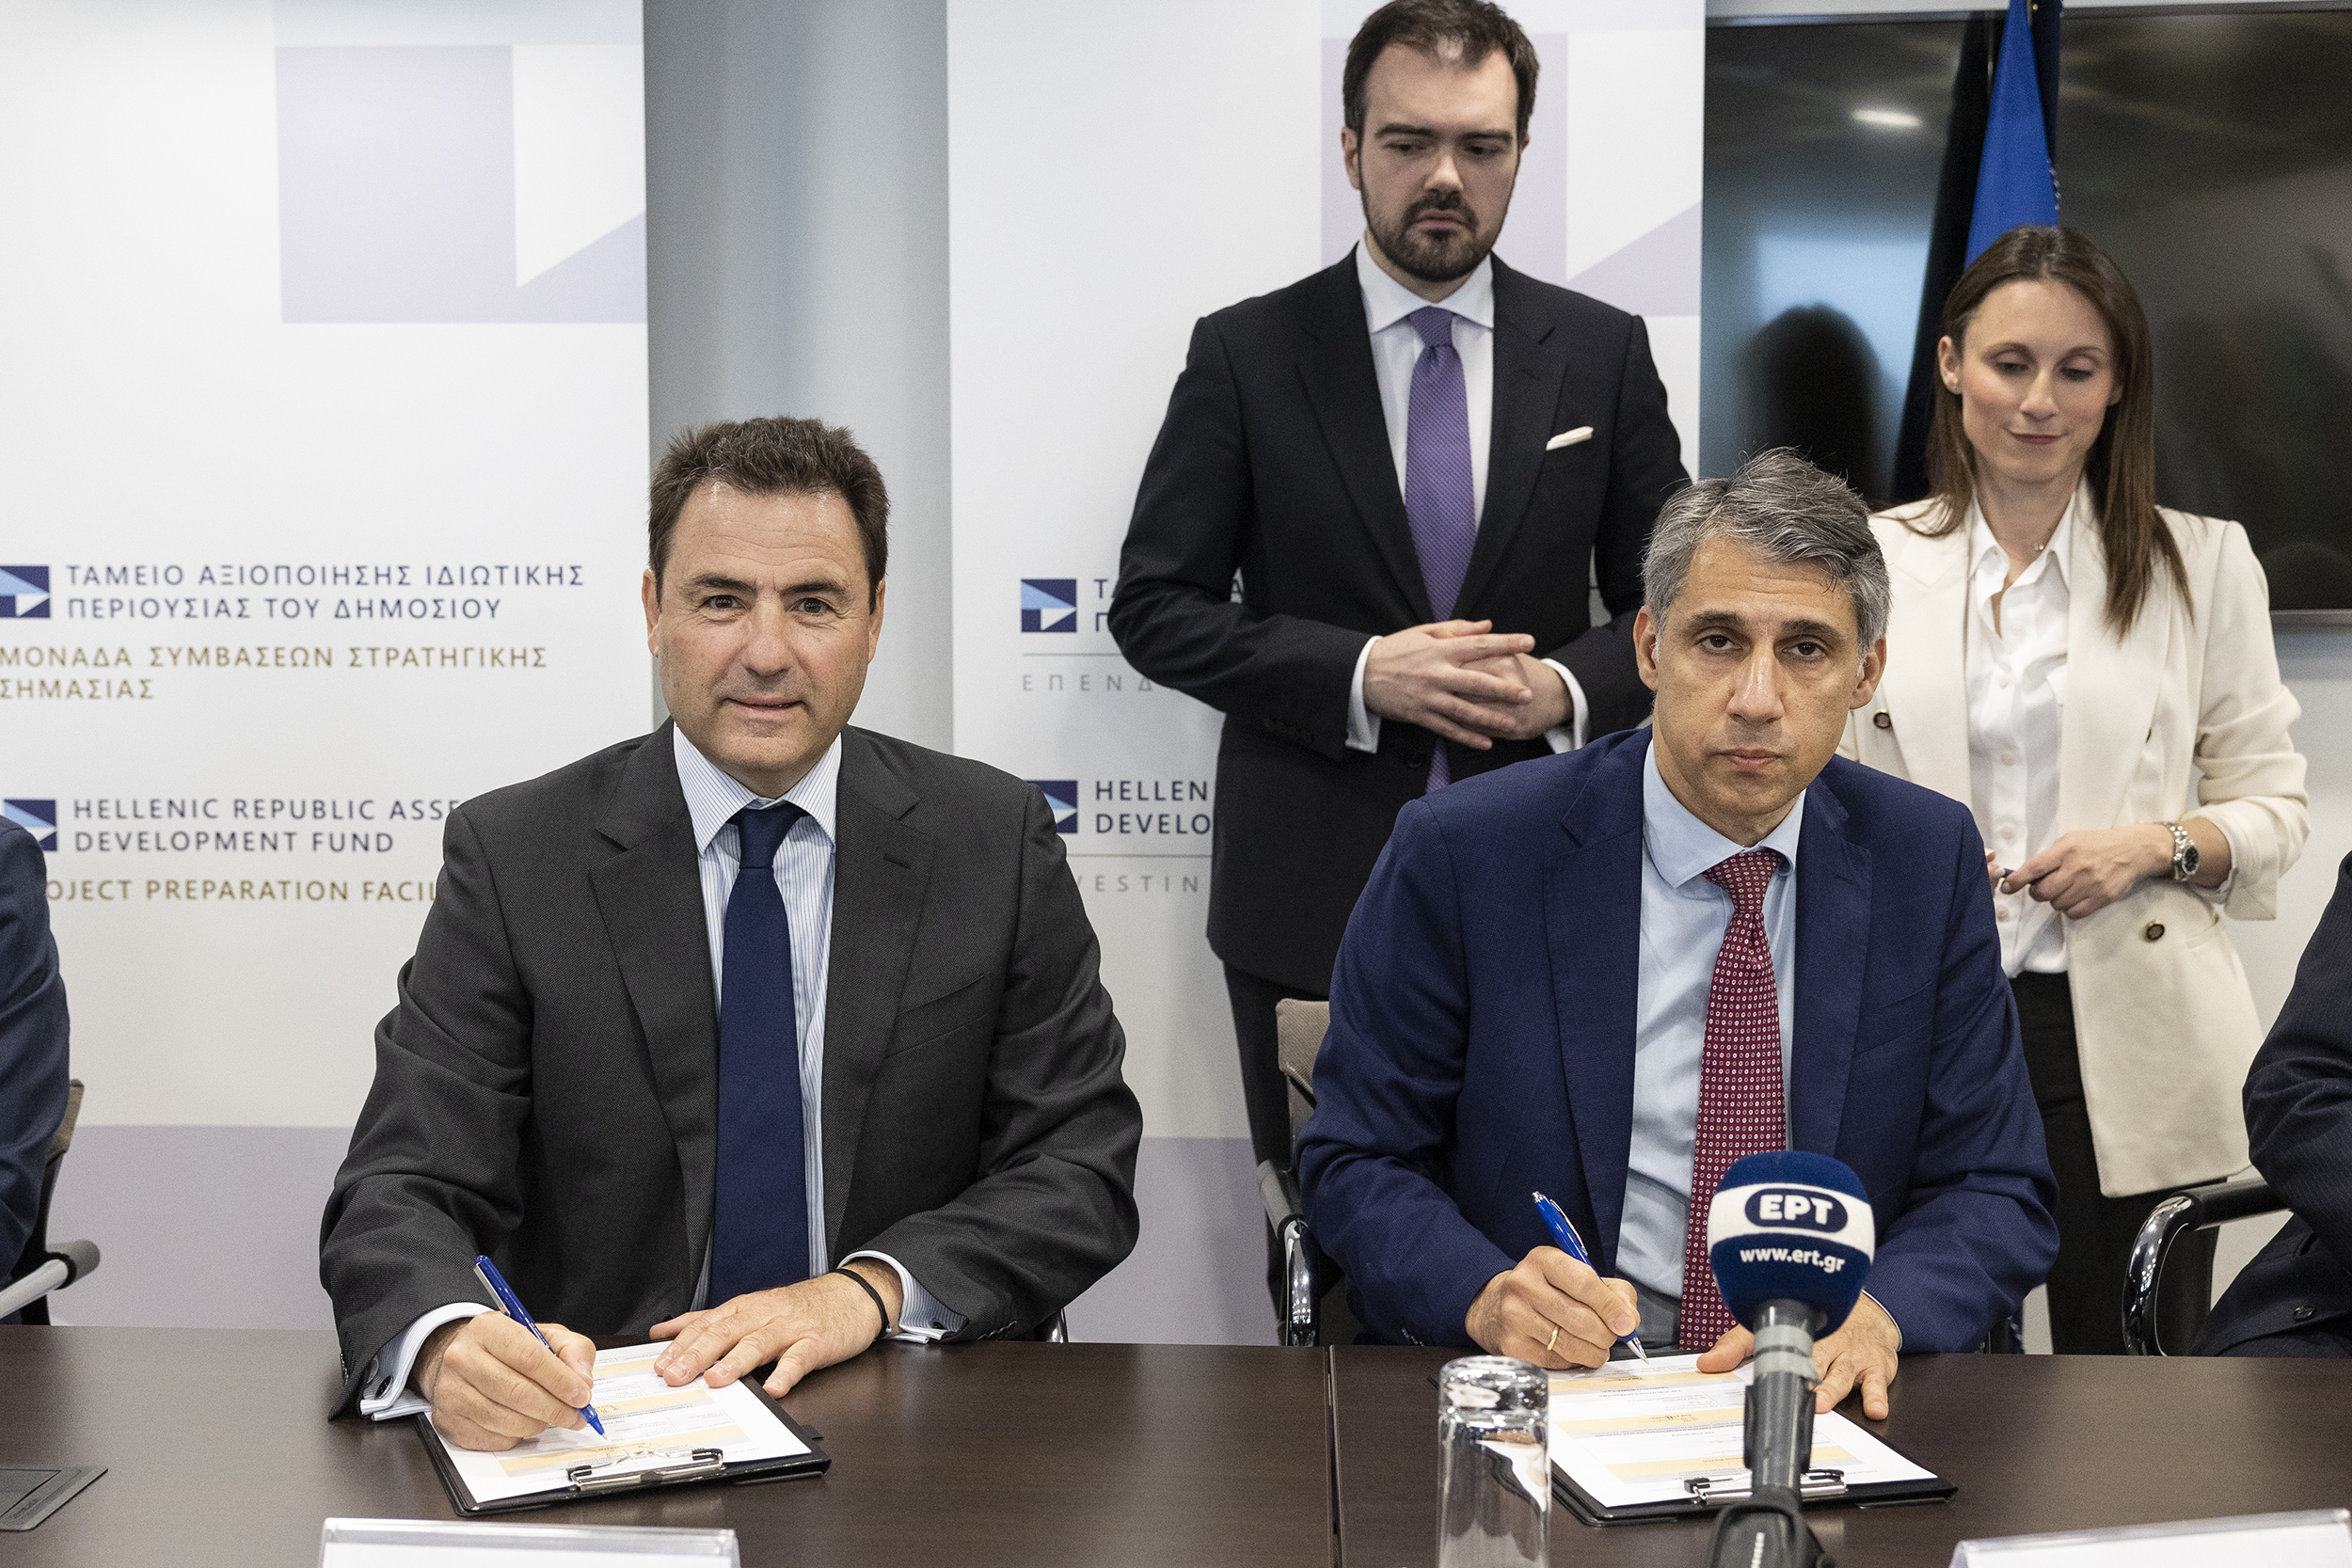 The sale of a majority stake in the Igoumenitsa Port was completed